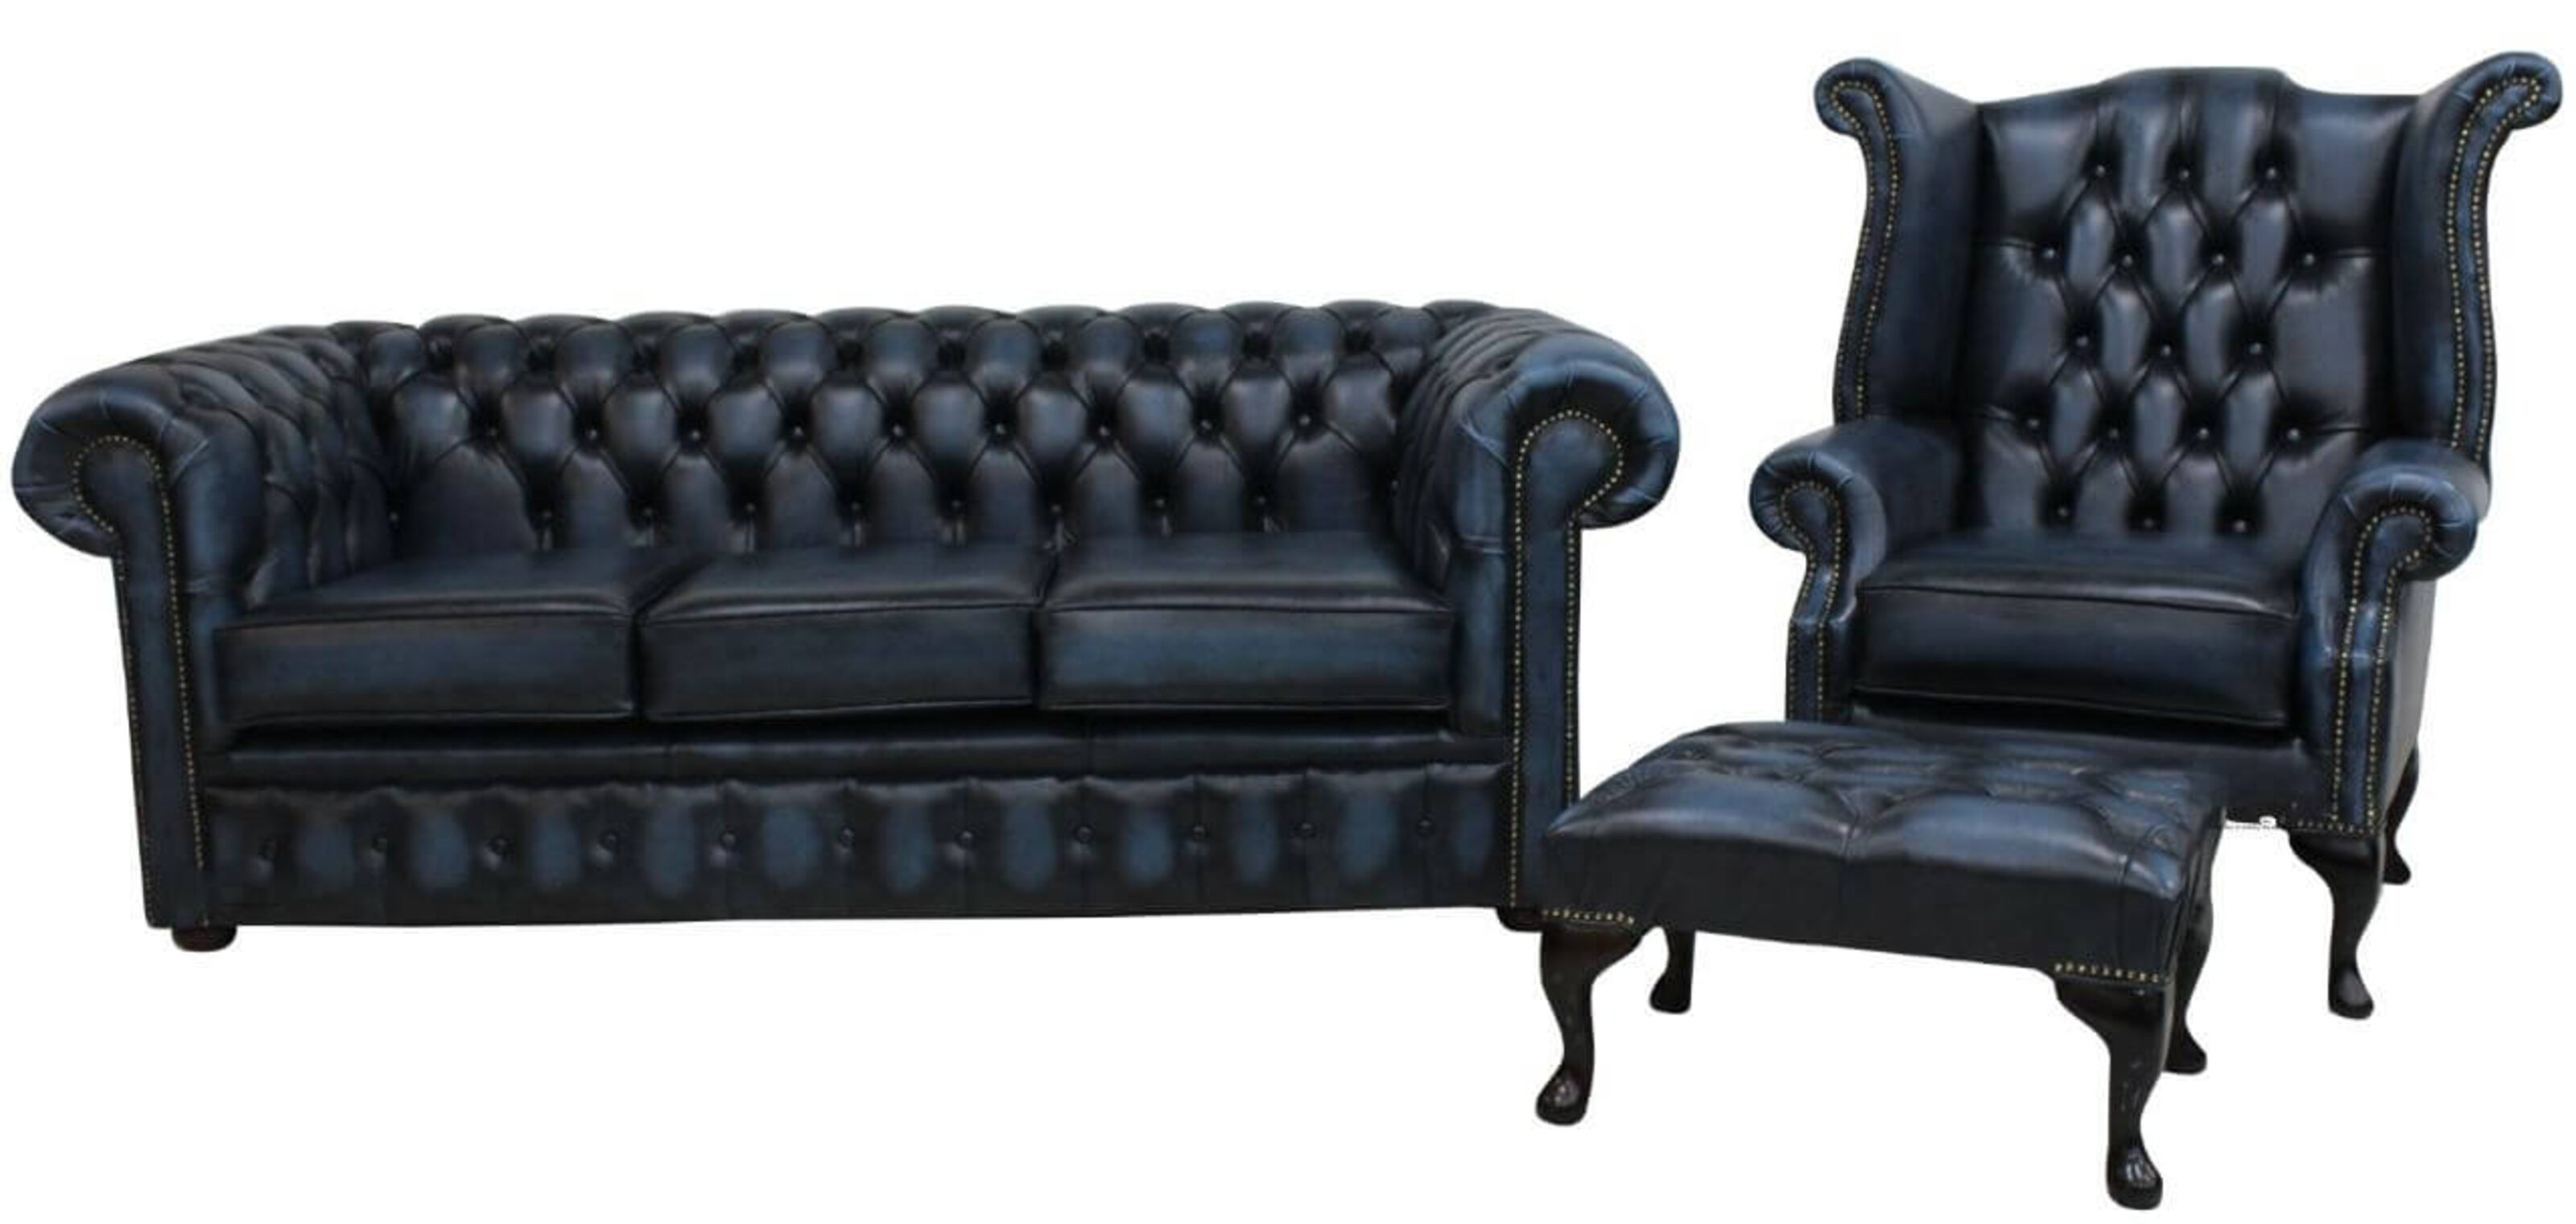 Chesterfield 3 Seater Sofa Queen Anne, Chesterfield Leather Armchair And Footstool